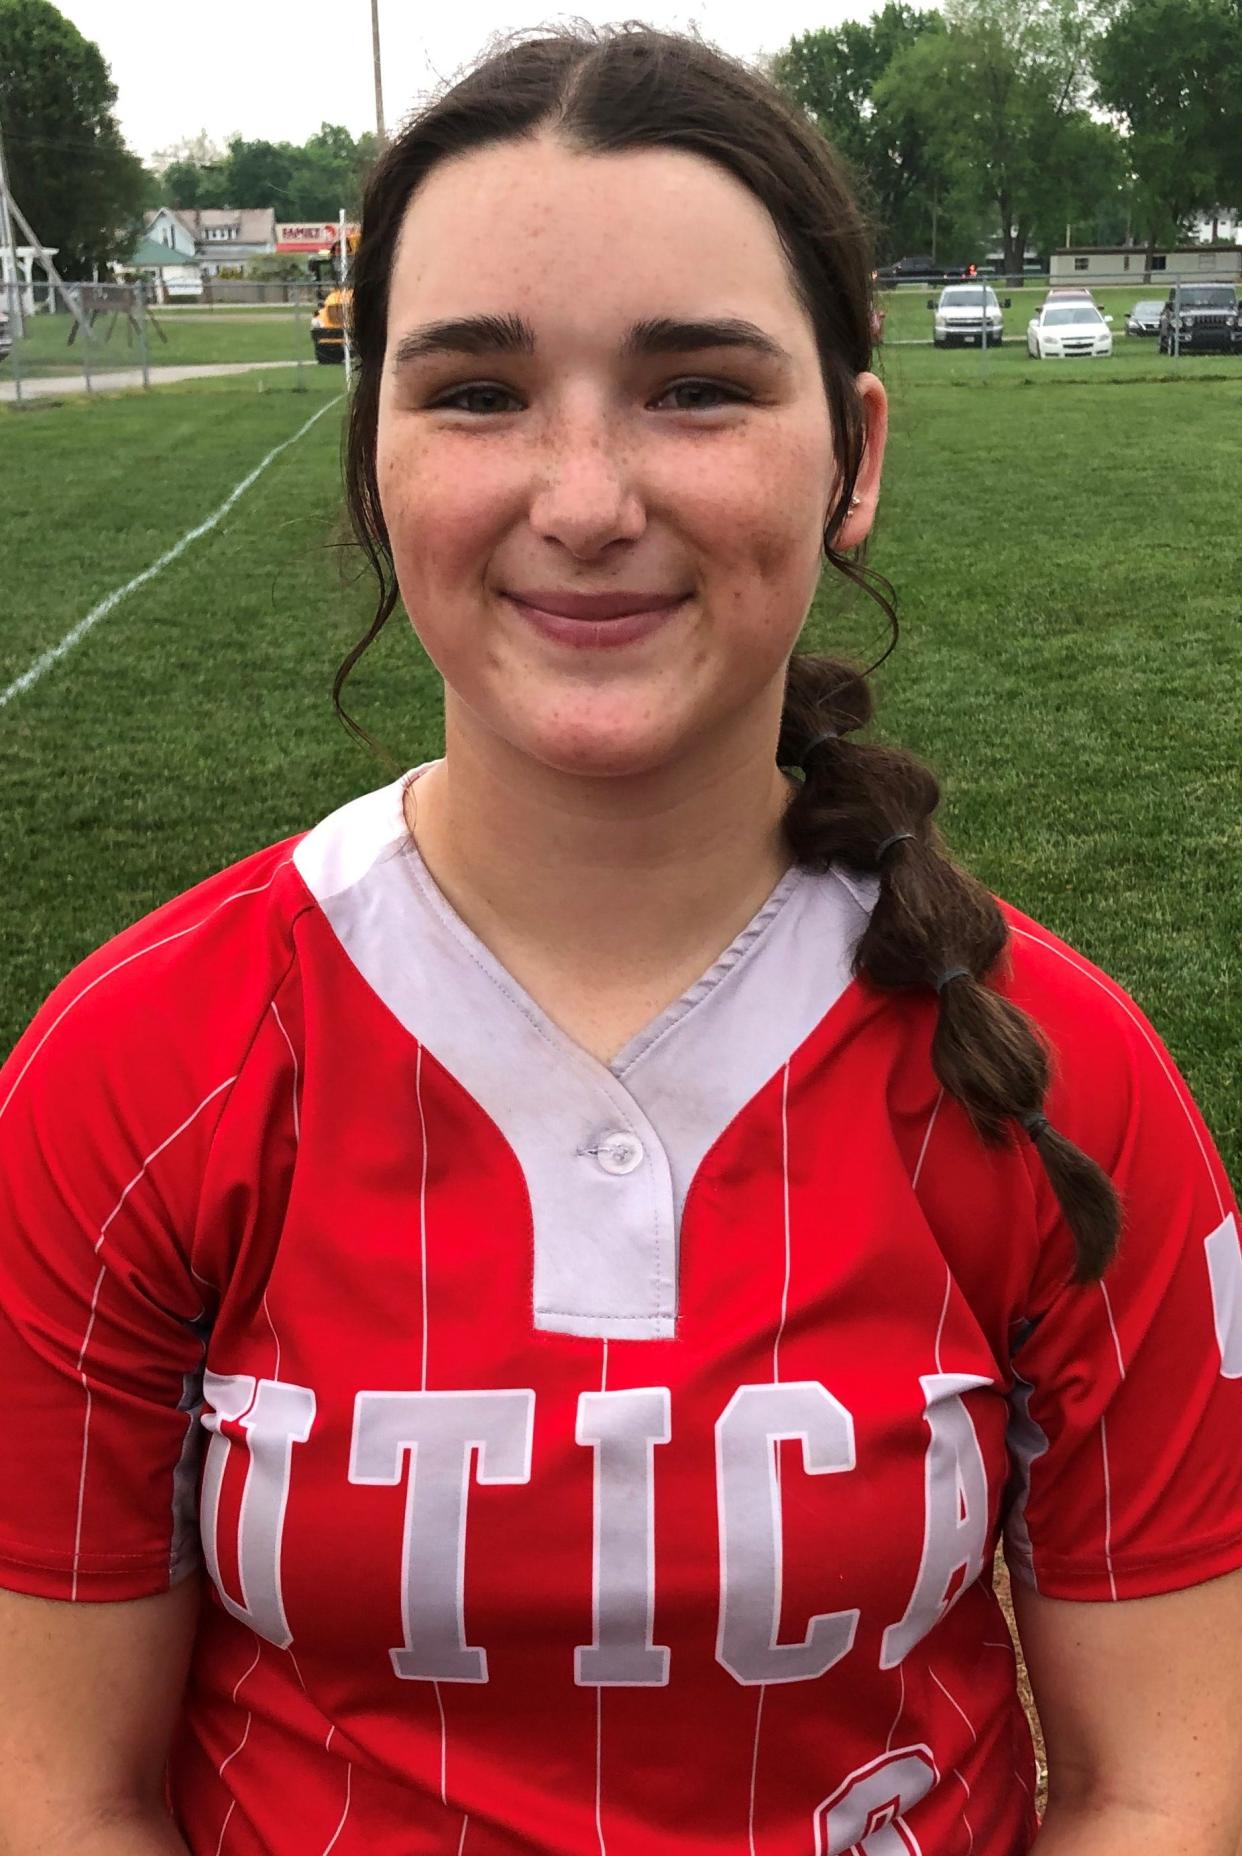 Utica junior Cheyenne Smith pitched a three-hitter Monday, striking out four and walking two as the Redskins opened Division III tournament play with a 3-1 win against visiting Centerburg.